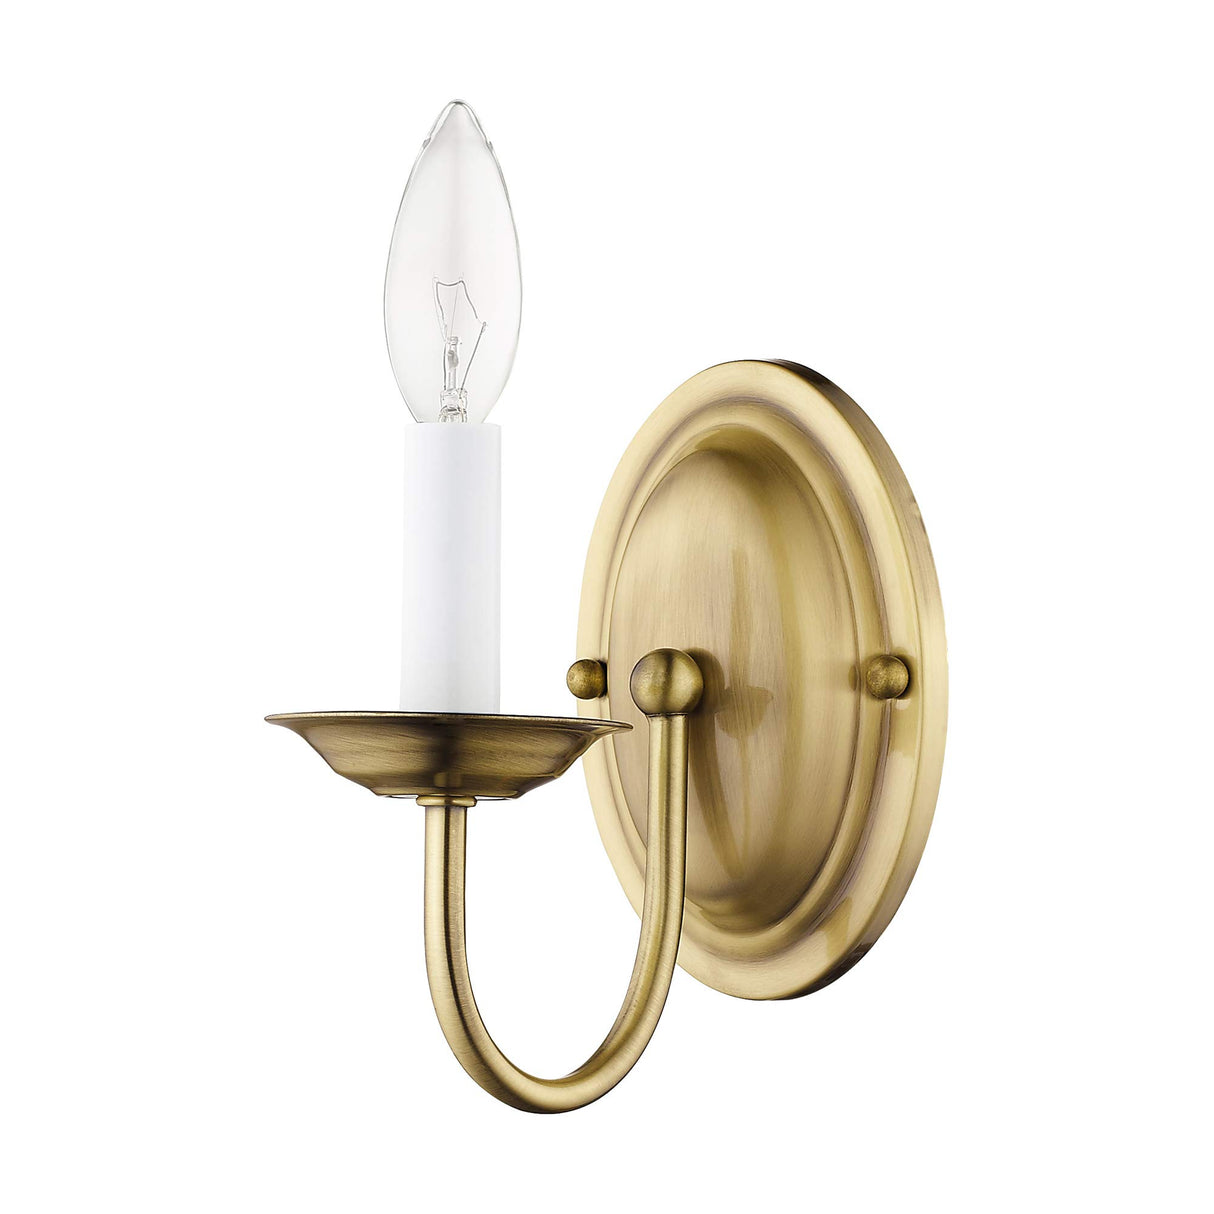 Livex Lighting 4151-01 Wall Sconce with No Shades, Antique Brass, 4.25"W x 7"H